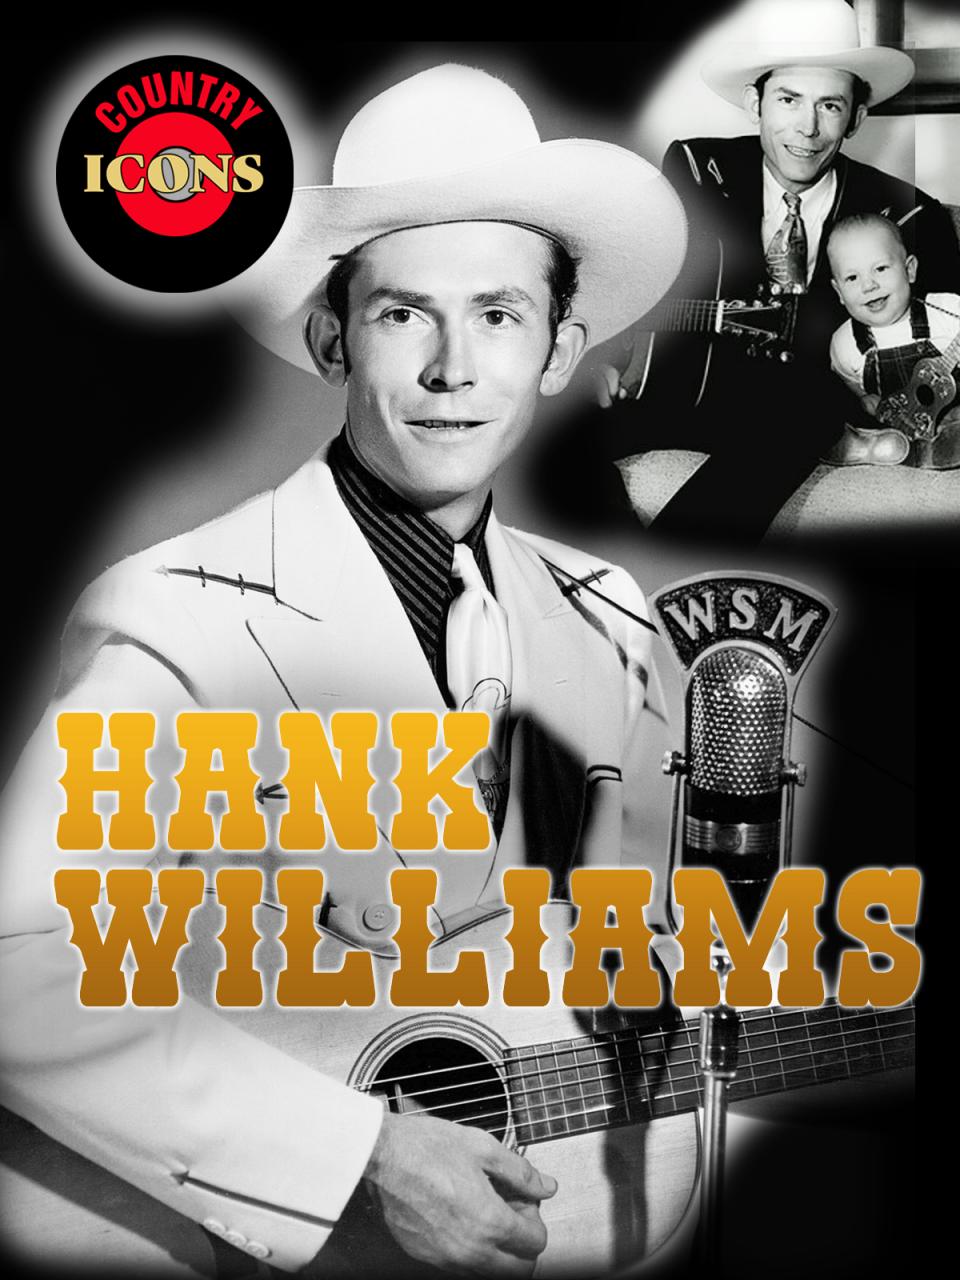 Country Icons: Hark Williams Sr.